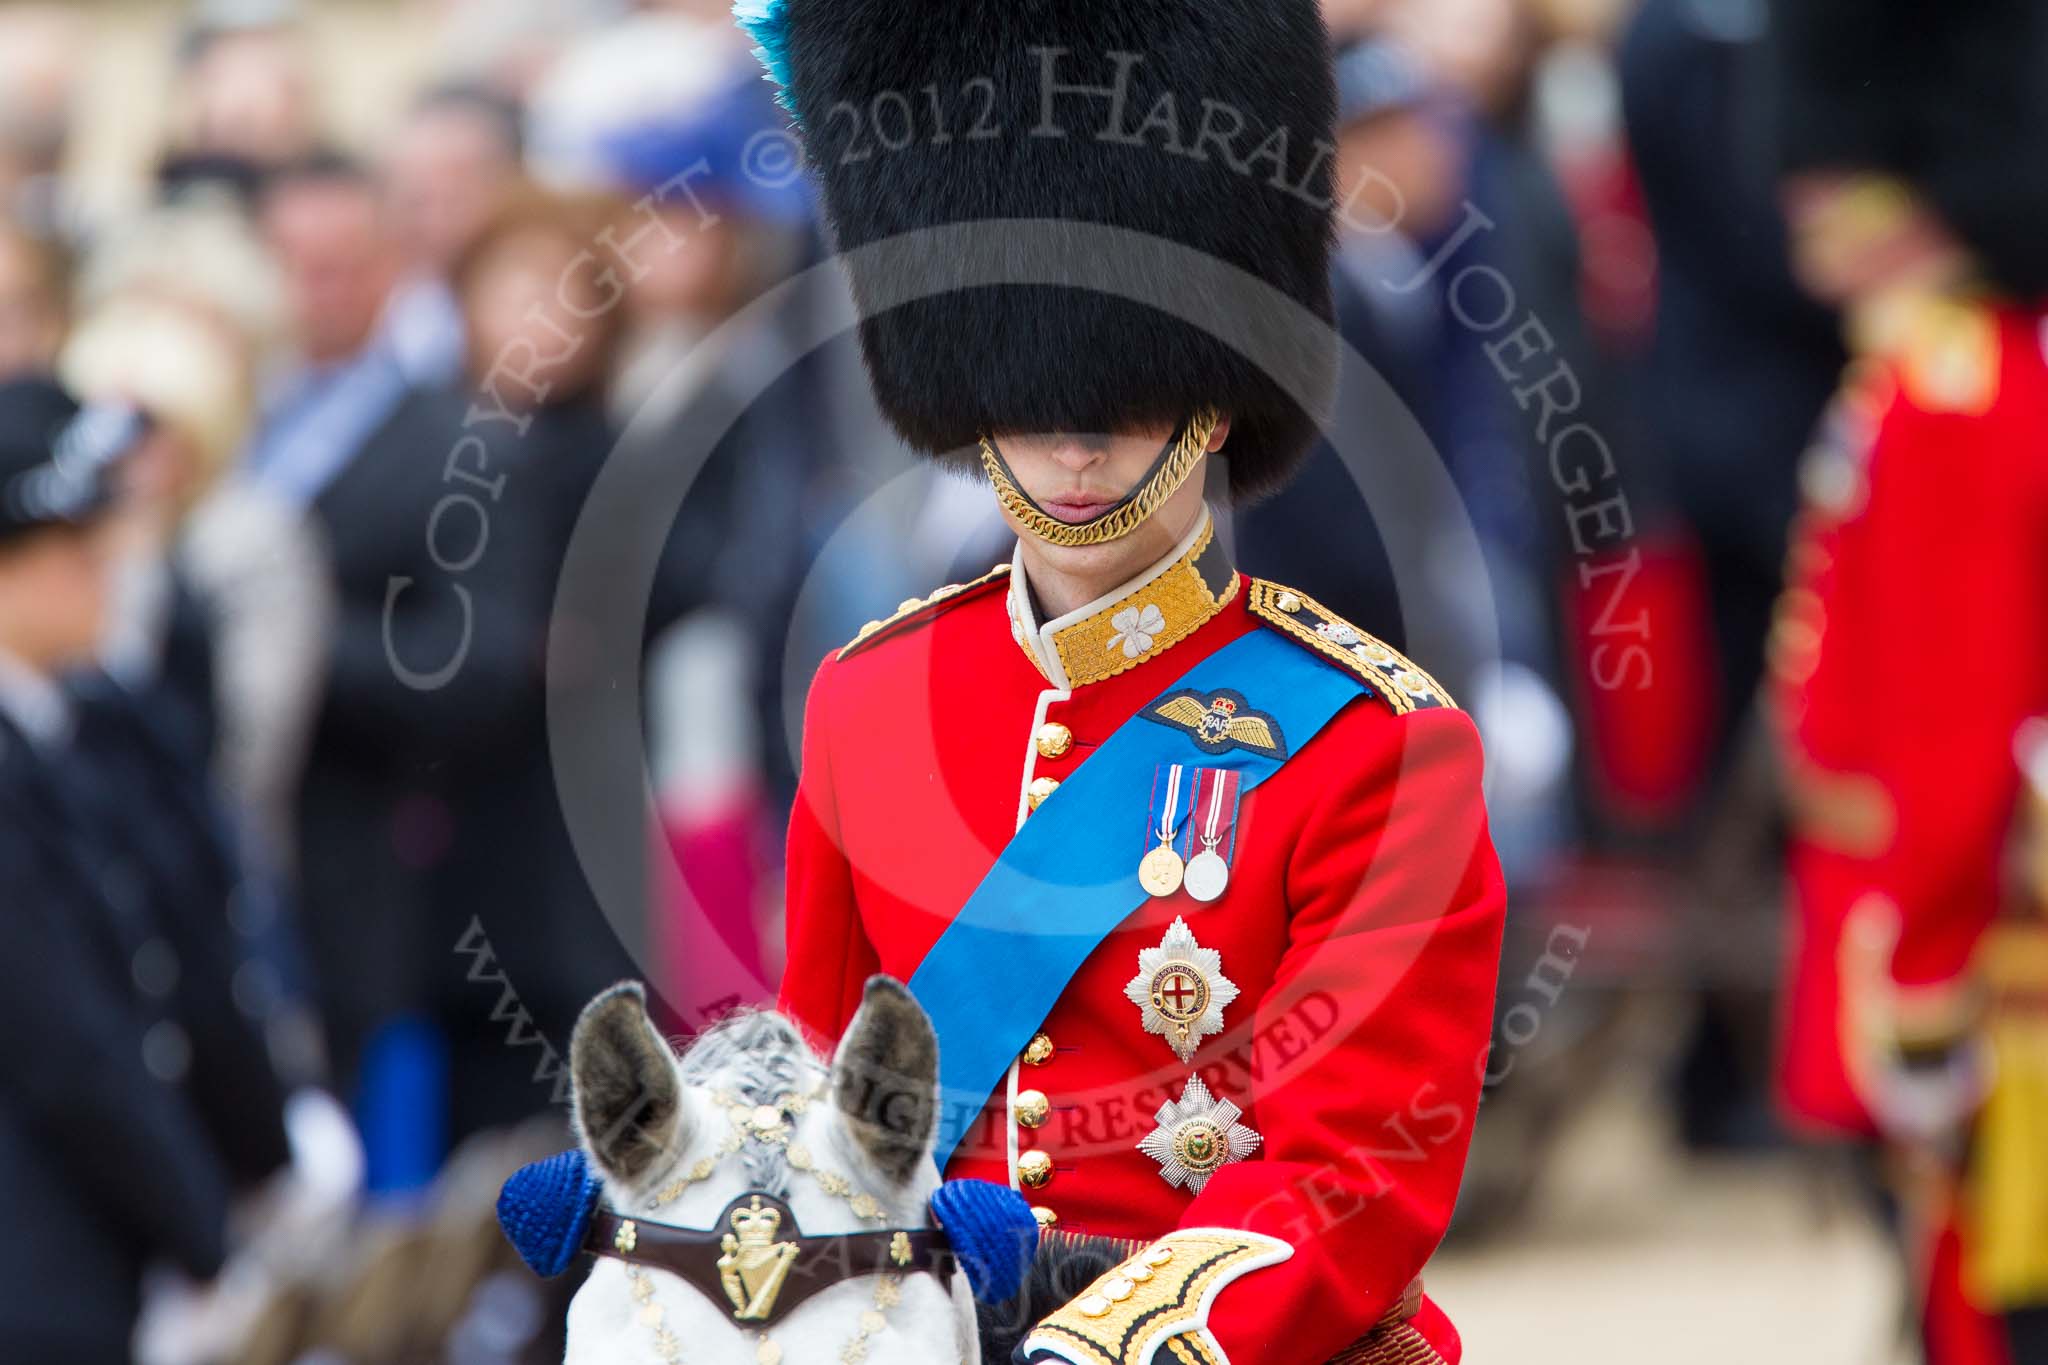 Trooping the Colour 2012: His Royal Highness The Duke of Cambridge,
Colonel Irish Guards..
Horse Guards Parade, Westminster,
London SW1,

United Kingdom,
on 16 June 2012 at 11:02, image #191